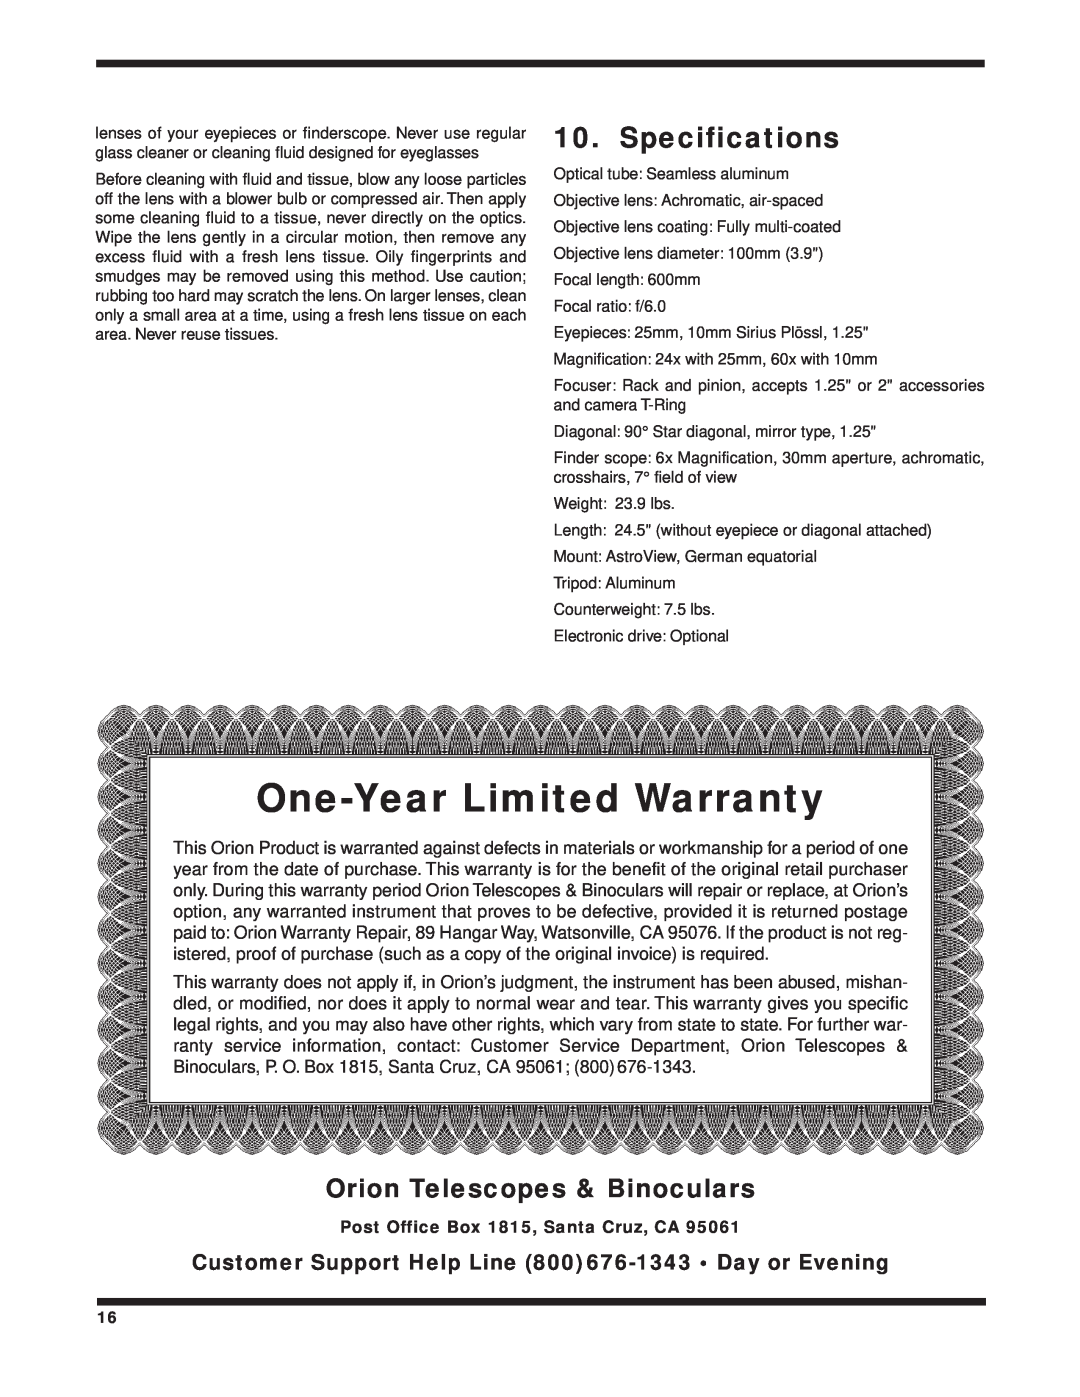 Orion 100 EQ instruction manual Specifications, Orion Telescopes & Binoculars, One-Year Limited Warranty 